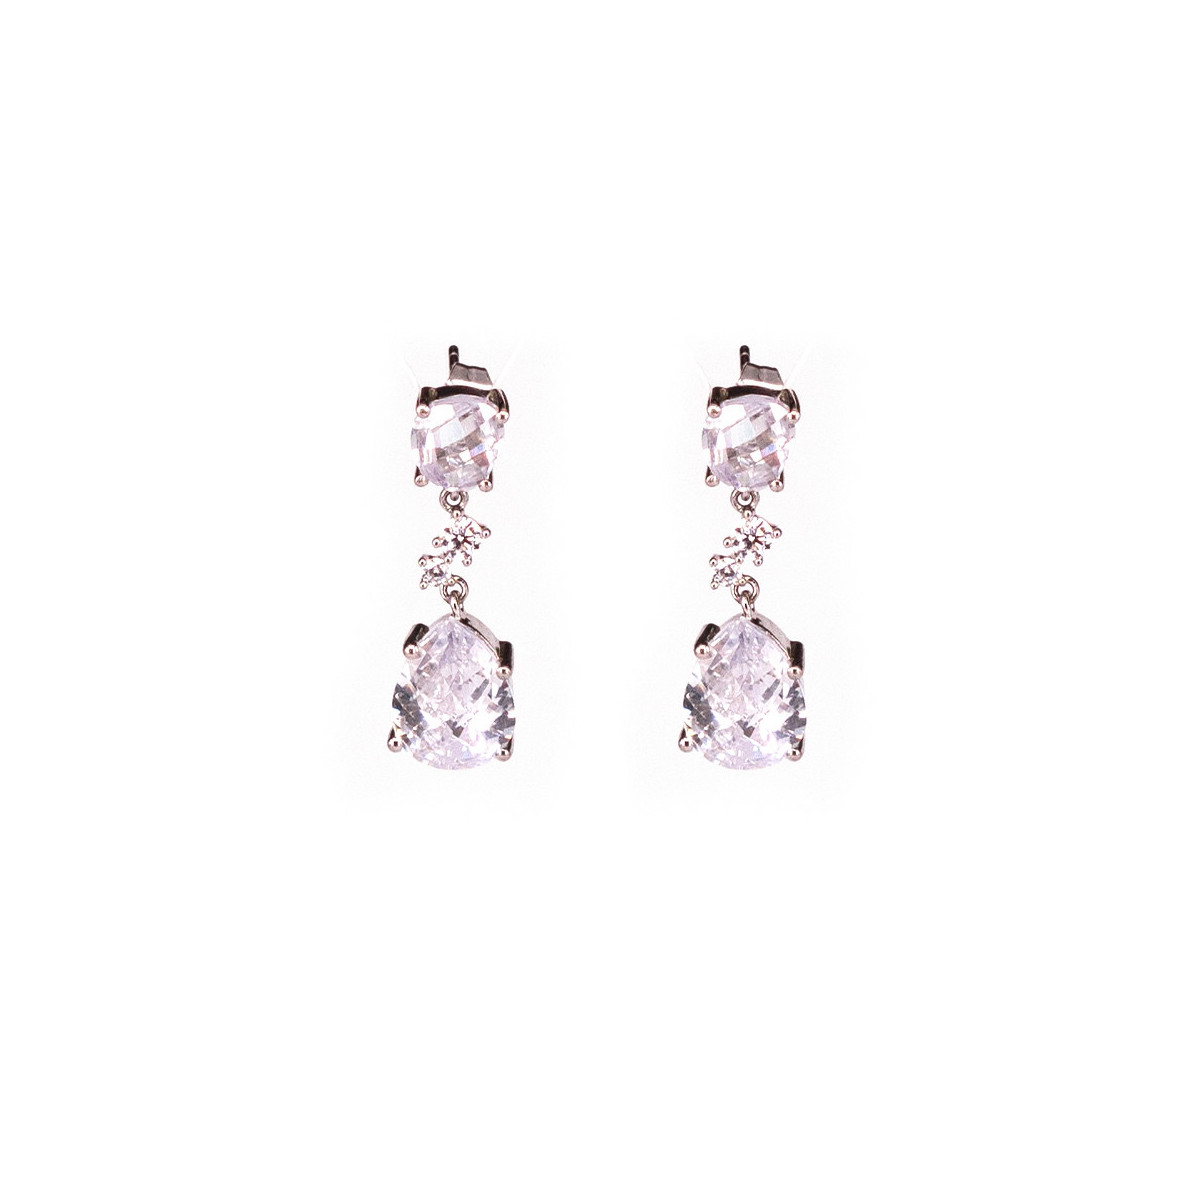 SILVER AND ZIRCONIA EARRINGS